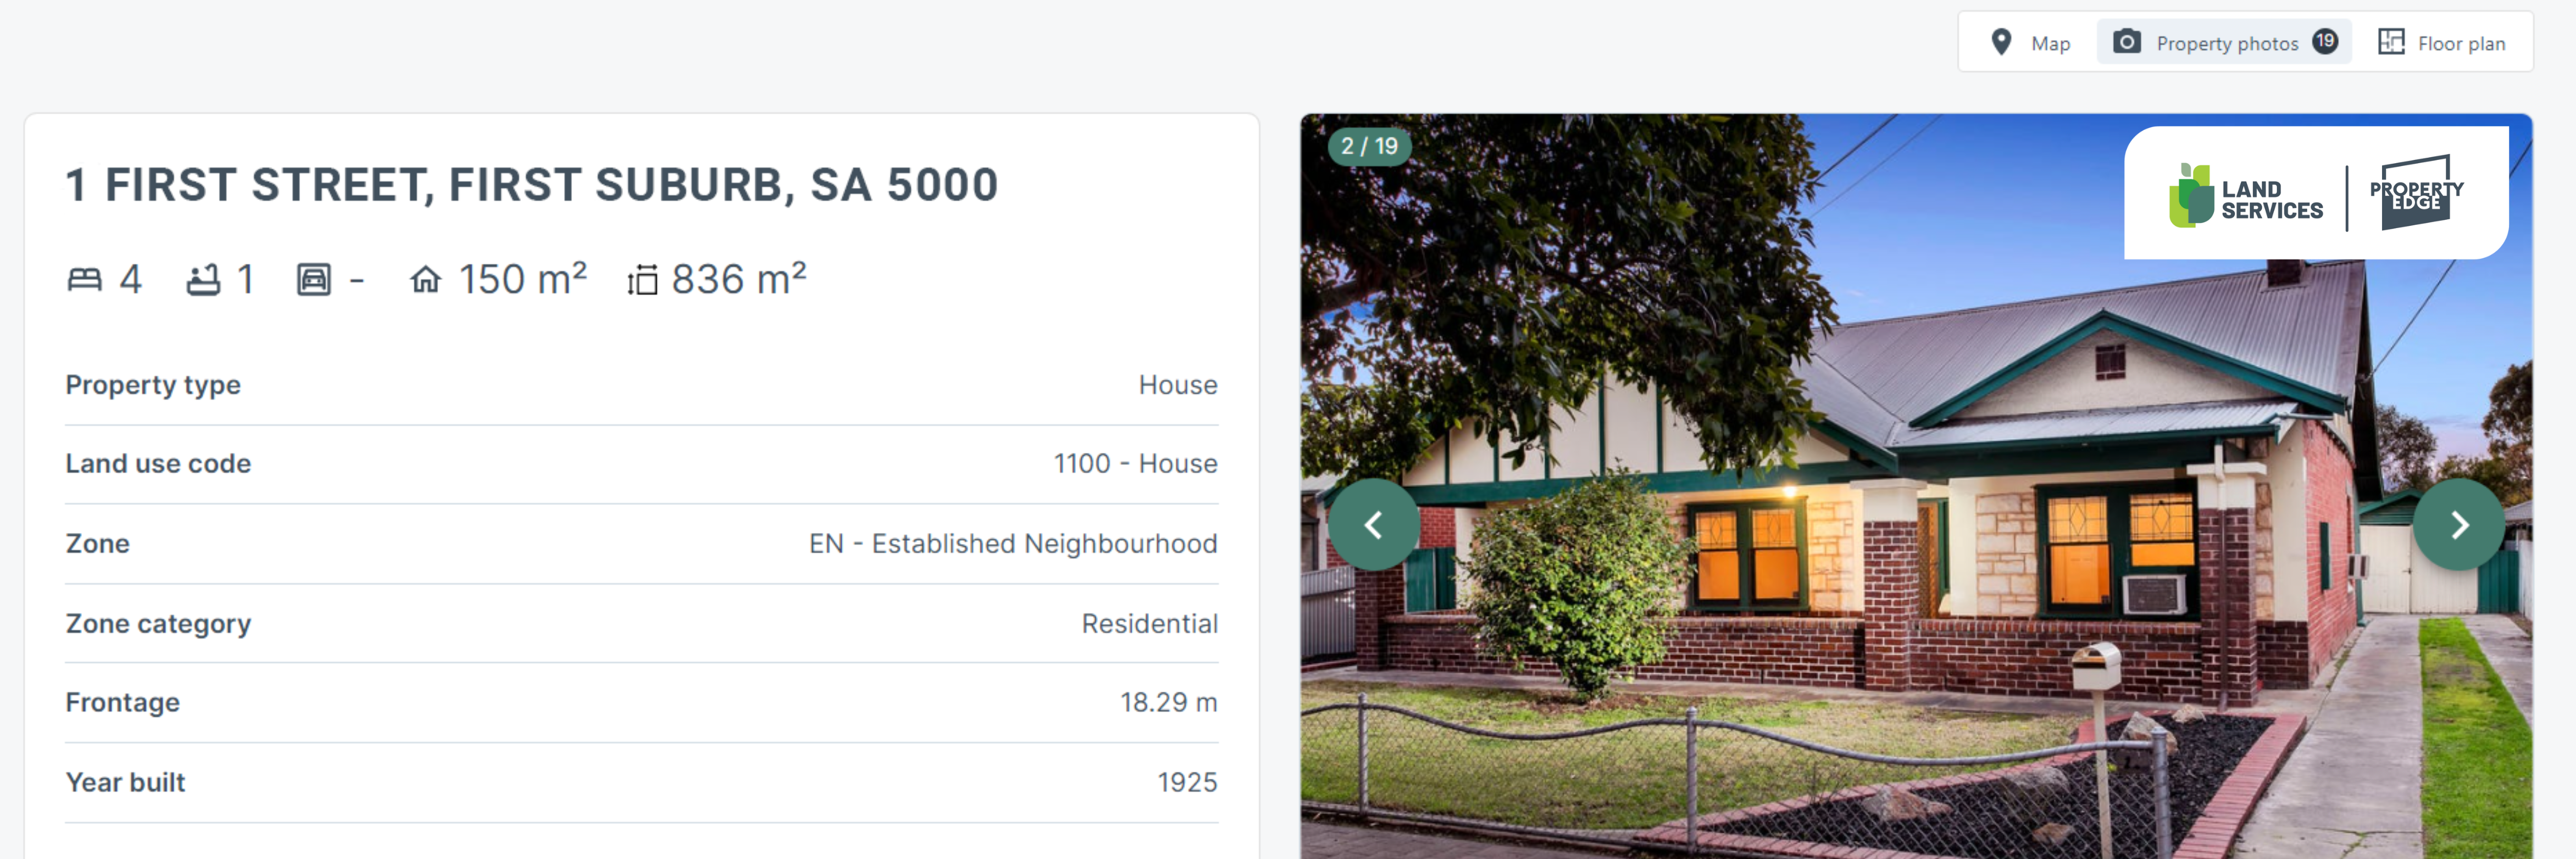 A real estate listing screenshot for a 4-bedroom house at 1 FIRST STREET, with a photo showing a vintage brick house with green trim, a gabled roof, and a fenced front yard.